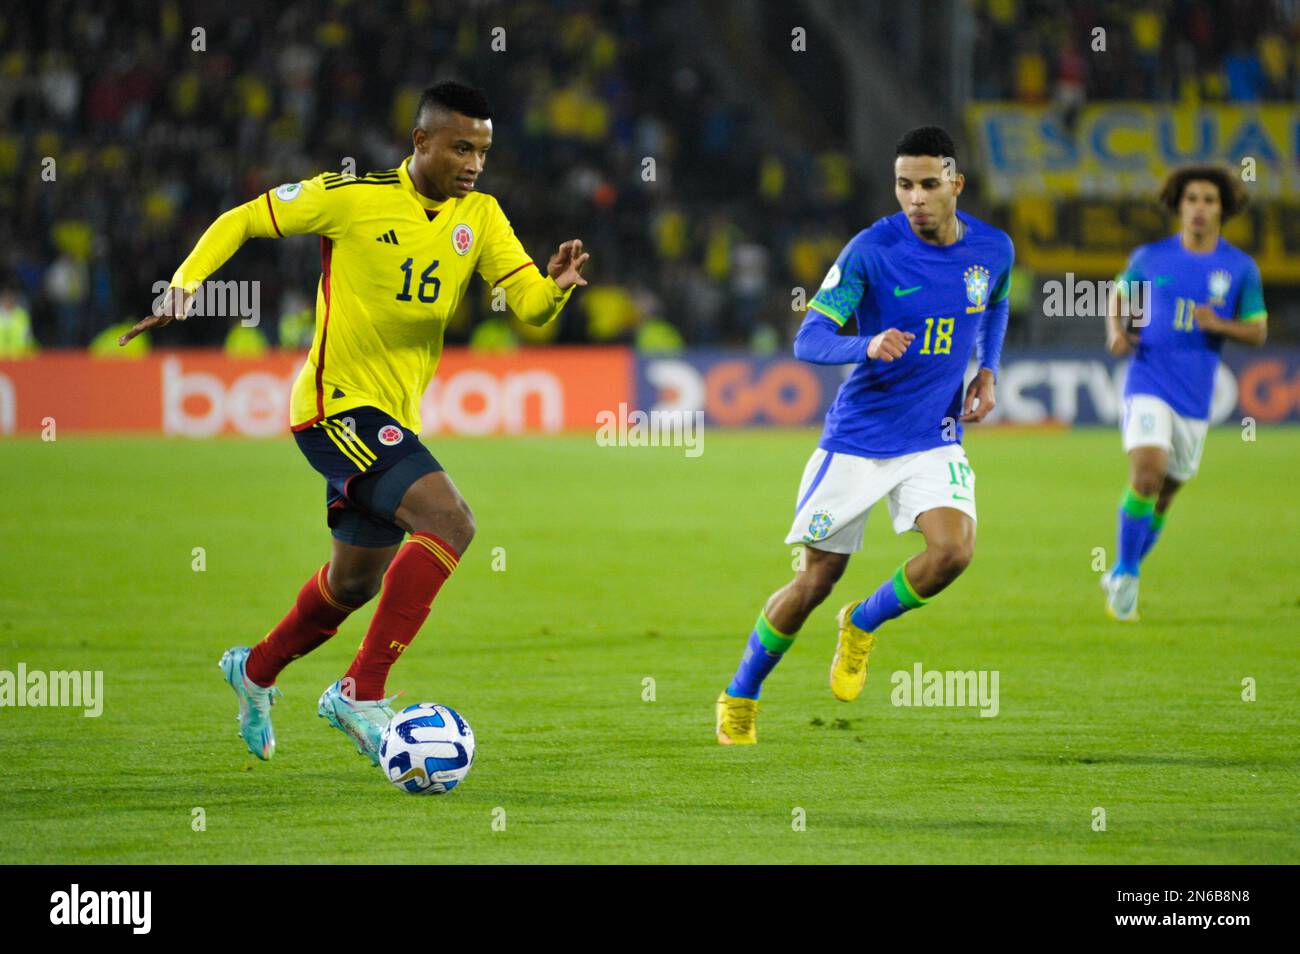 Bogota, Colombia on February 8, 2023. Colombia's Oscar Cortes and Brazil's Alexsander Gomes during the CONMEBOL South American U-20 Colombia tournament match between Colombia and Brazil, in Bogota, Colombia on February 8, 2023. Photo by: Chepa Beltran/Long Visual Press Stock Photo